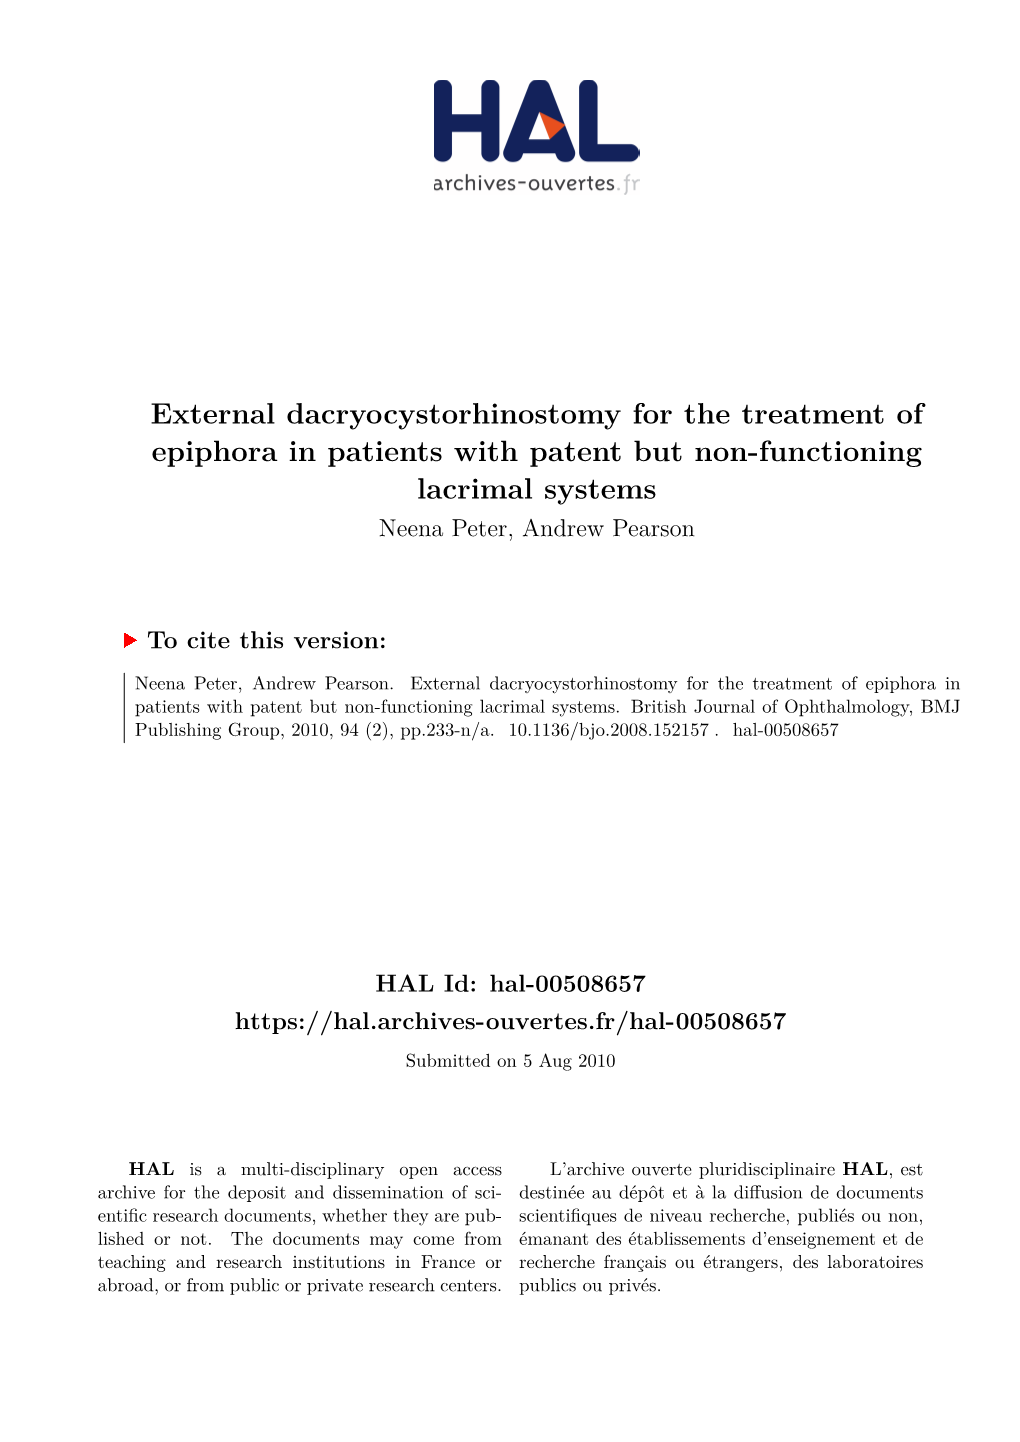 External Dacryocystorhinostomy for the Treatment of Epiphora in Patients with Patent but Non-Functioning Lacrimal Systems Neena Peter, Andrew Pearson